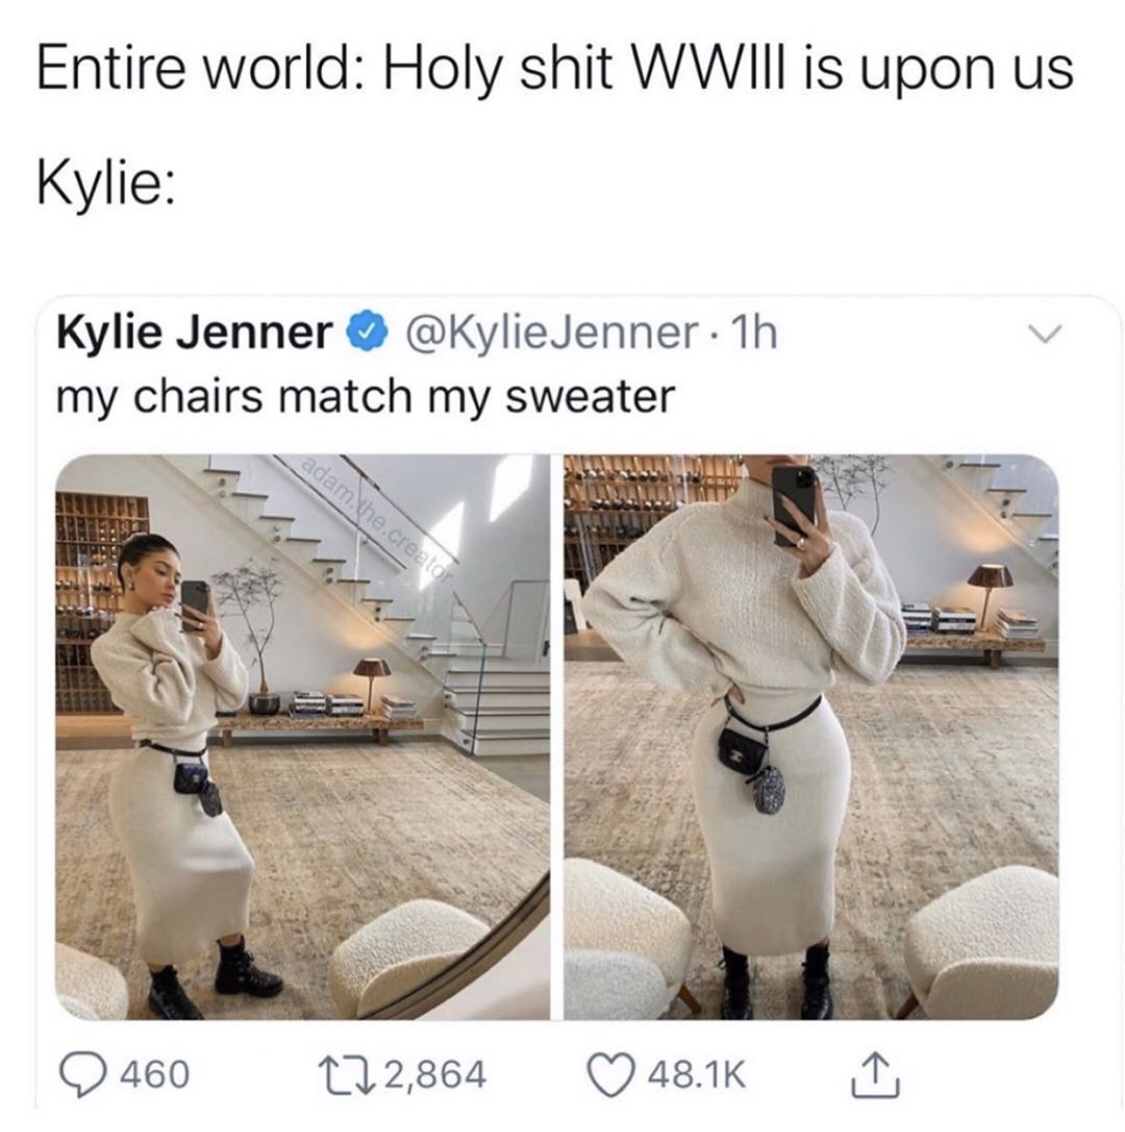 shoulder - Entire world Holy shit Wwiii is upon us Kylie Kylie Jenner Jenner 1h my chairs match my sweater adam.the.creator 2460 222,864 I